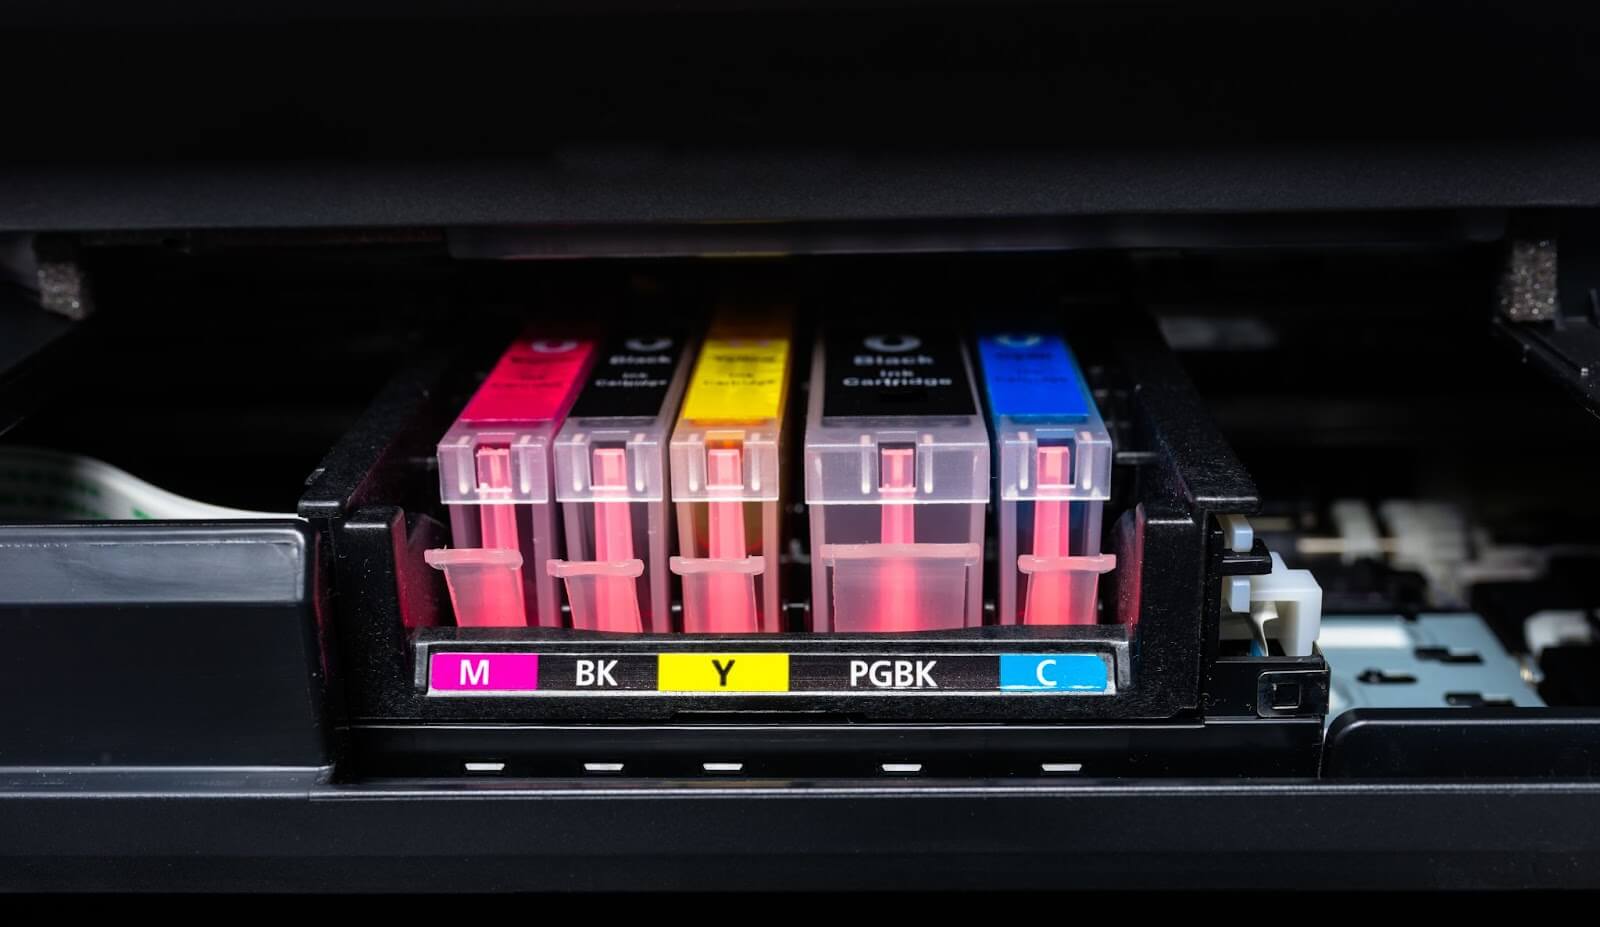 10 Common Myths About Ink Cartridges Debunked